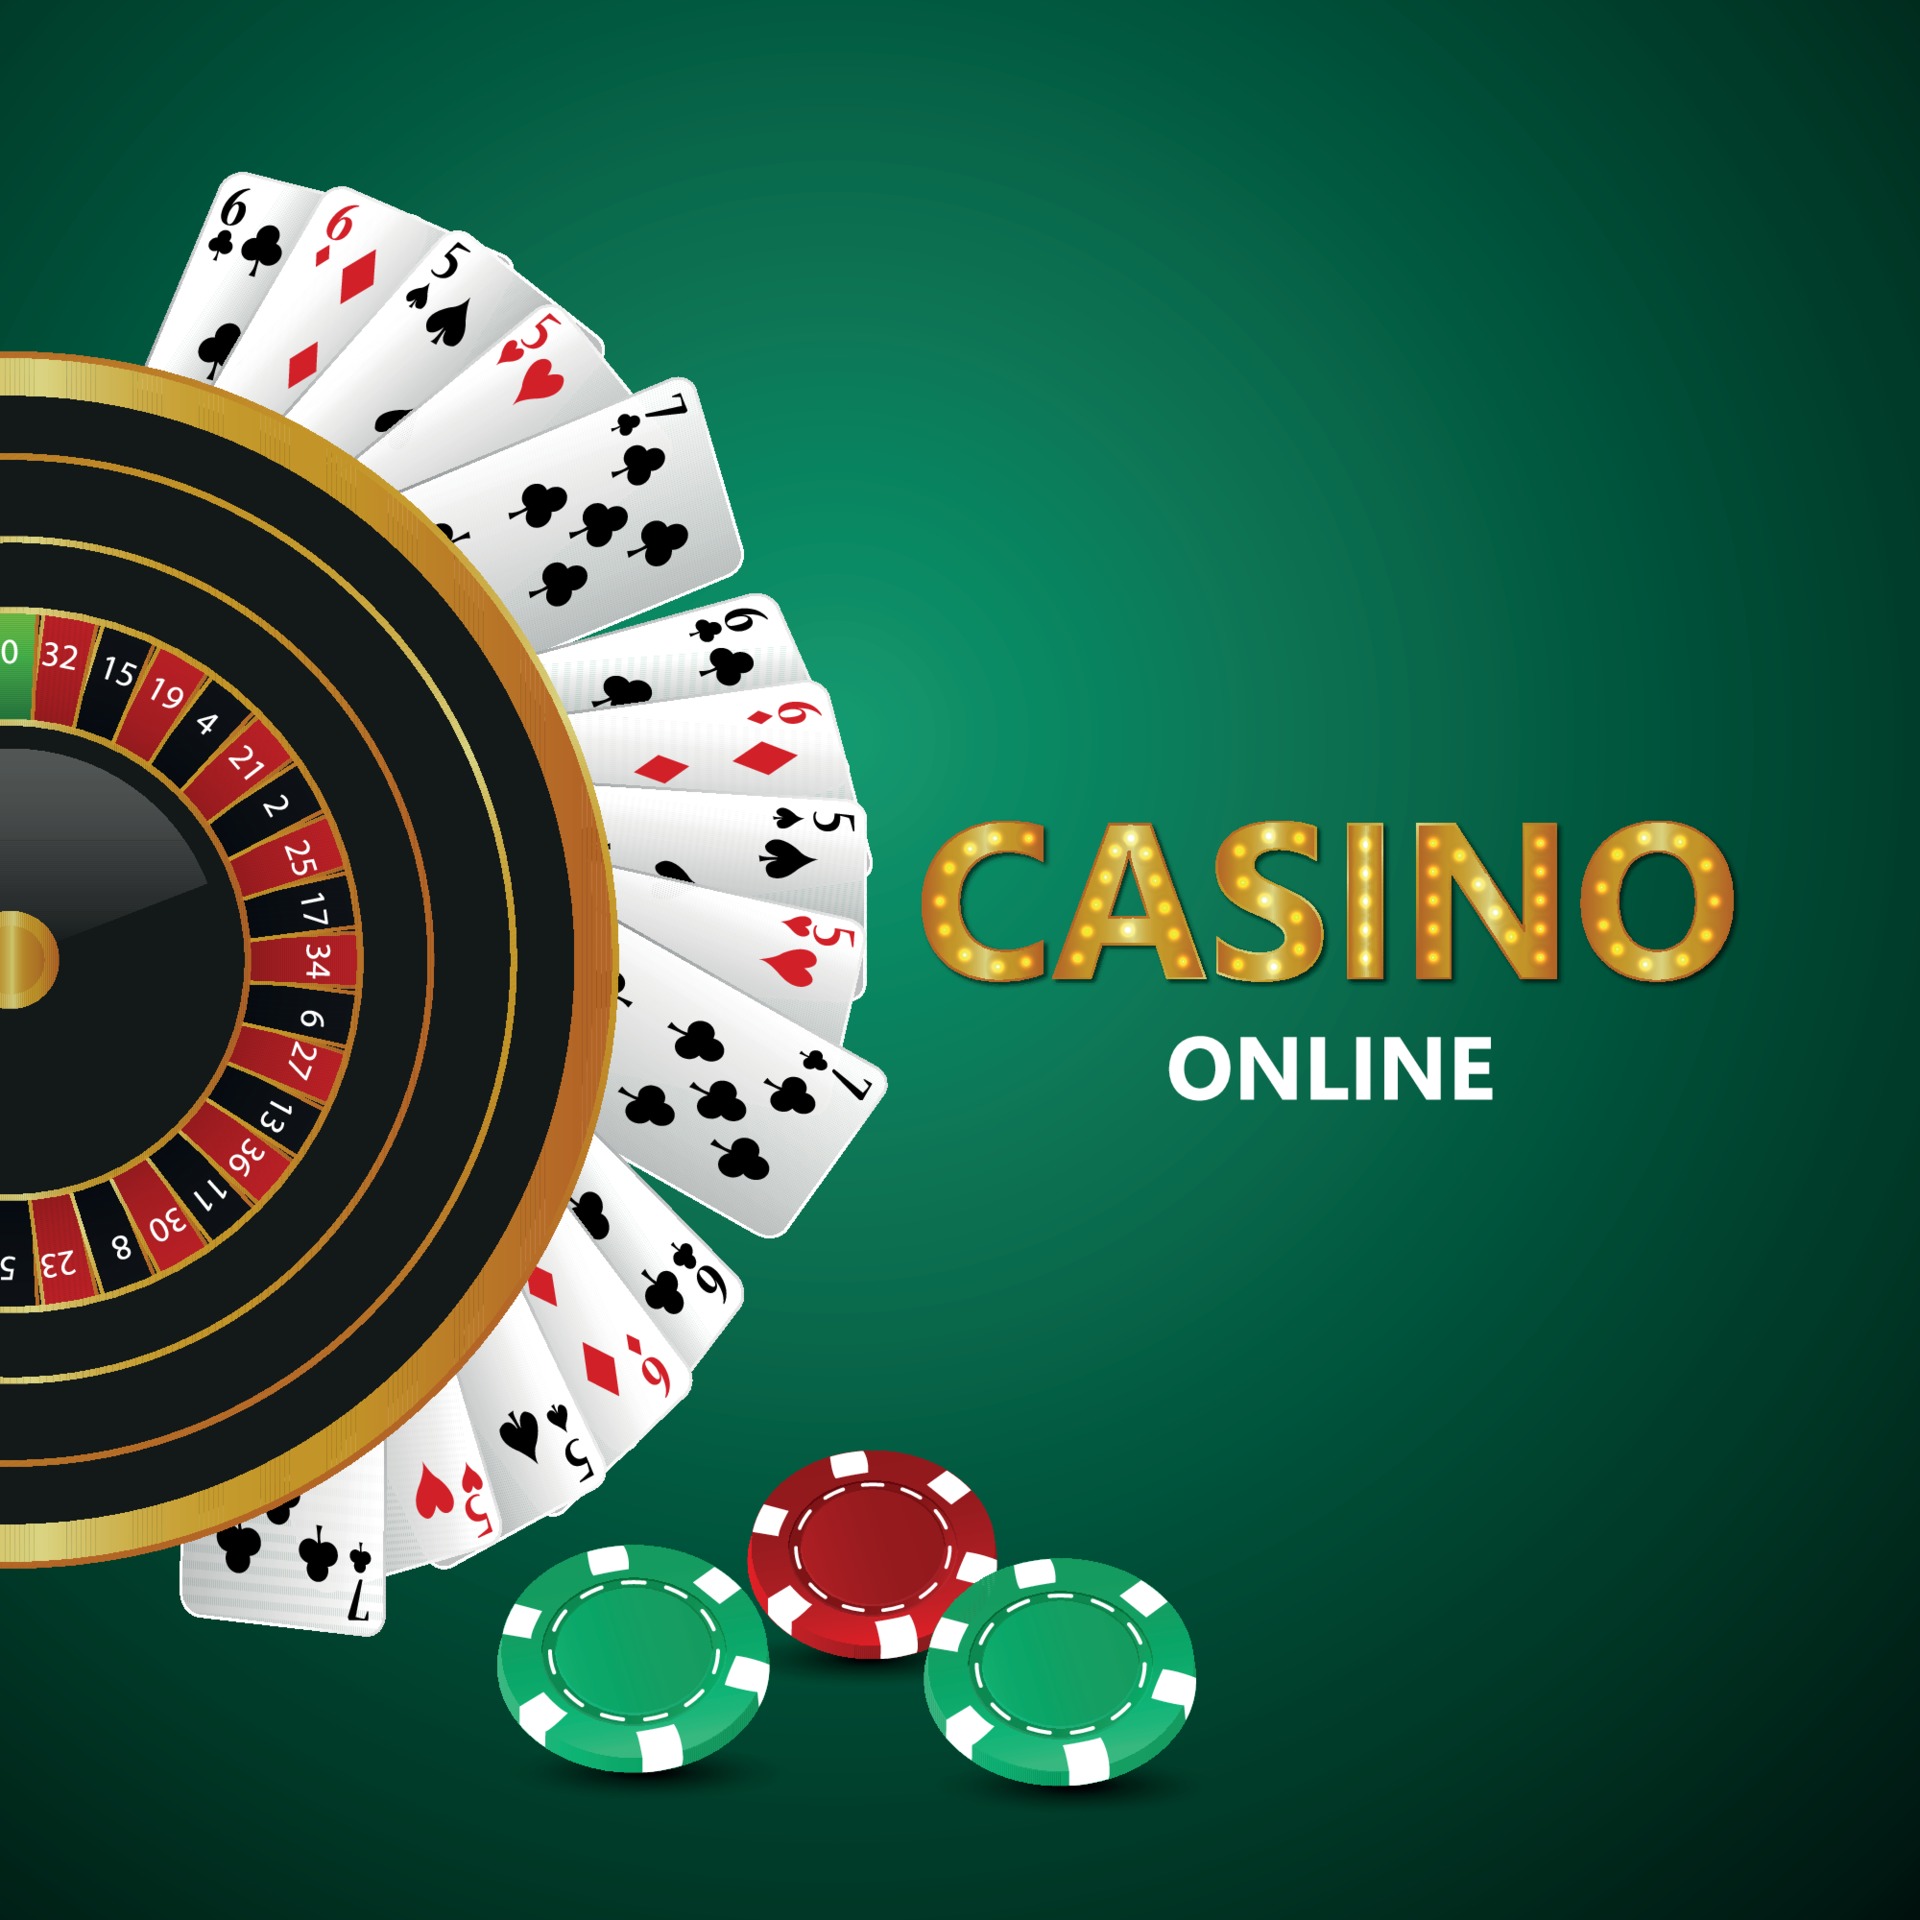 What You Need to Know About Online Casino Free Credit Offers?